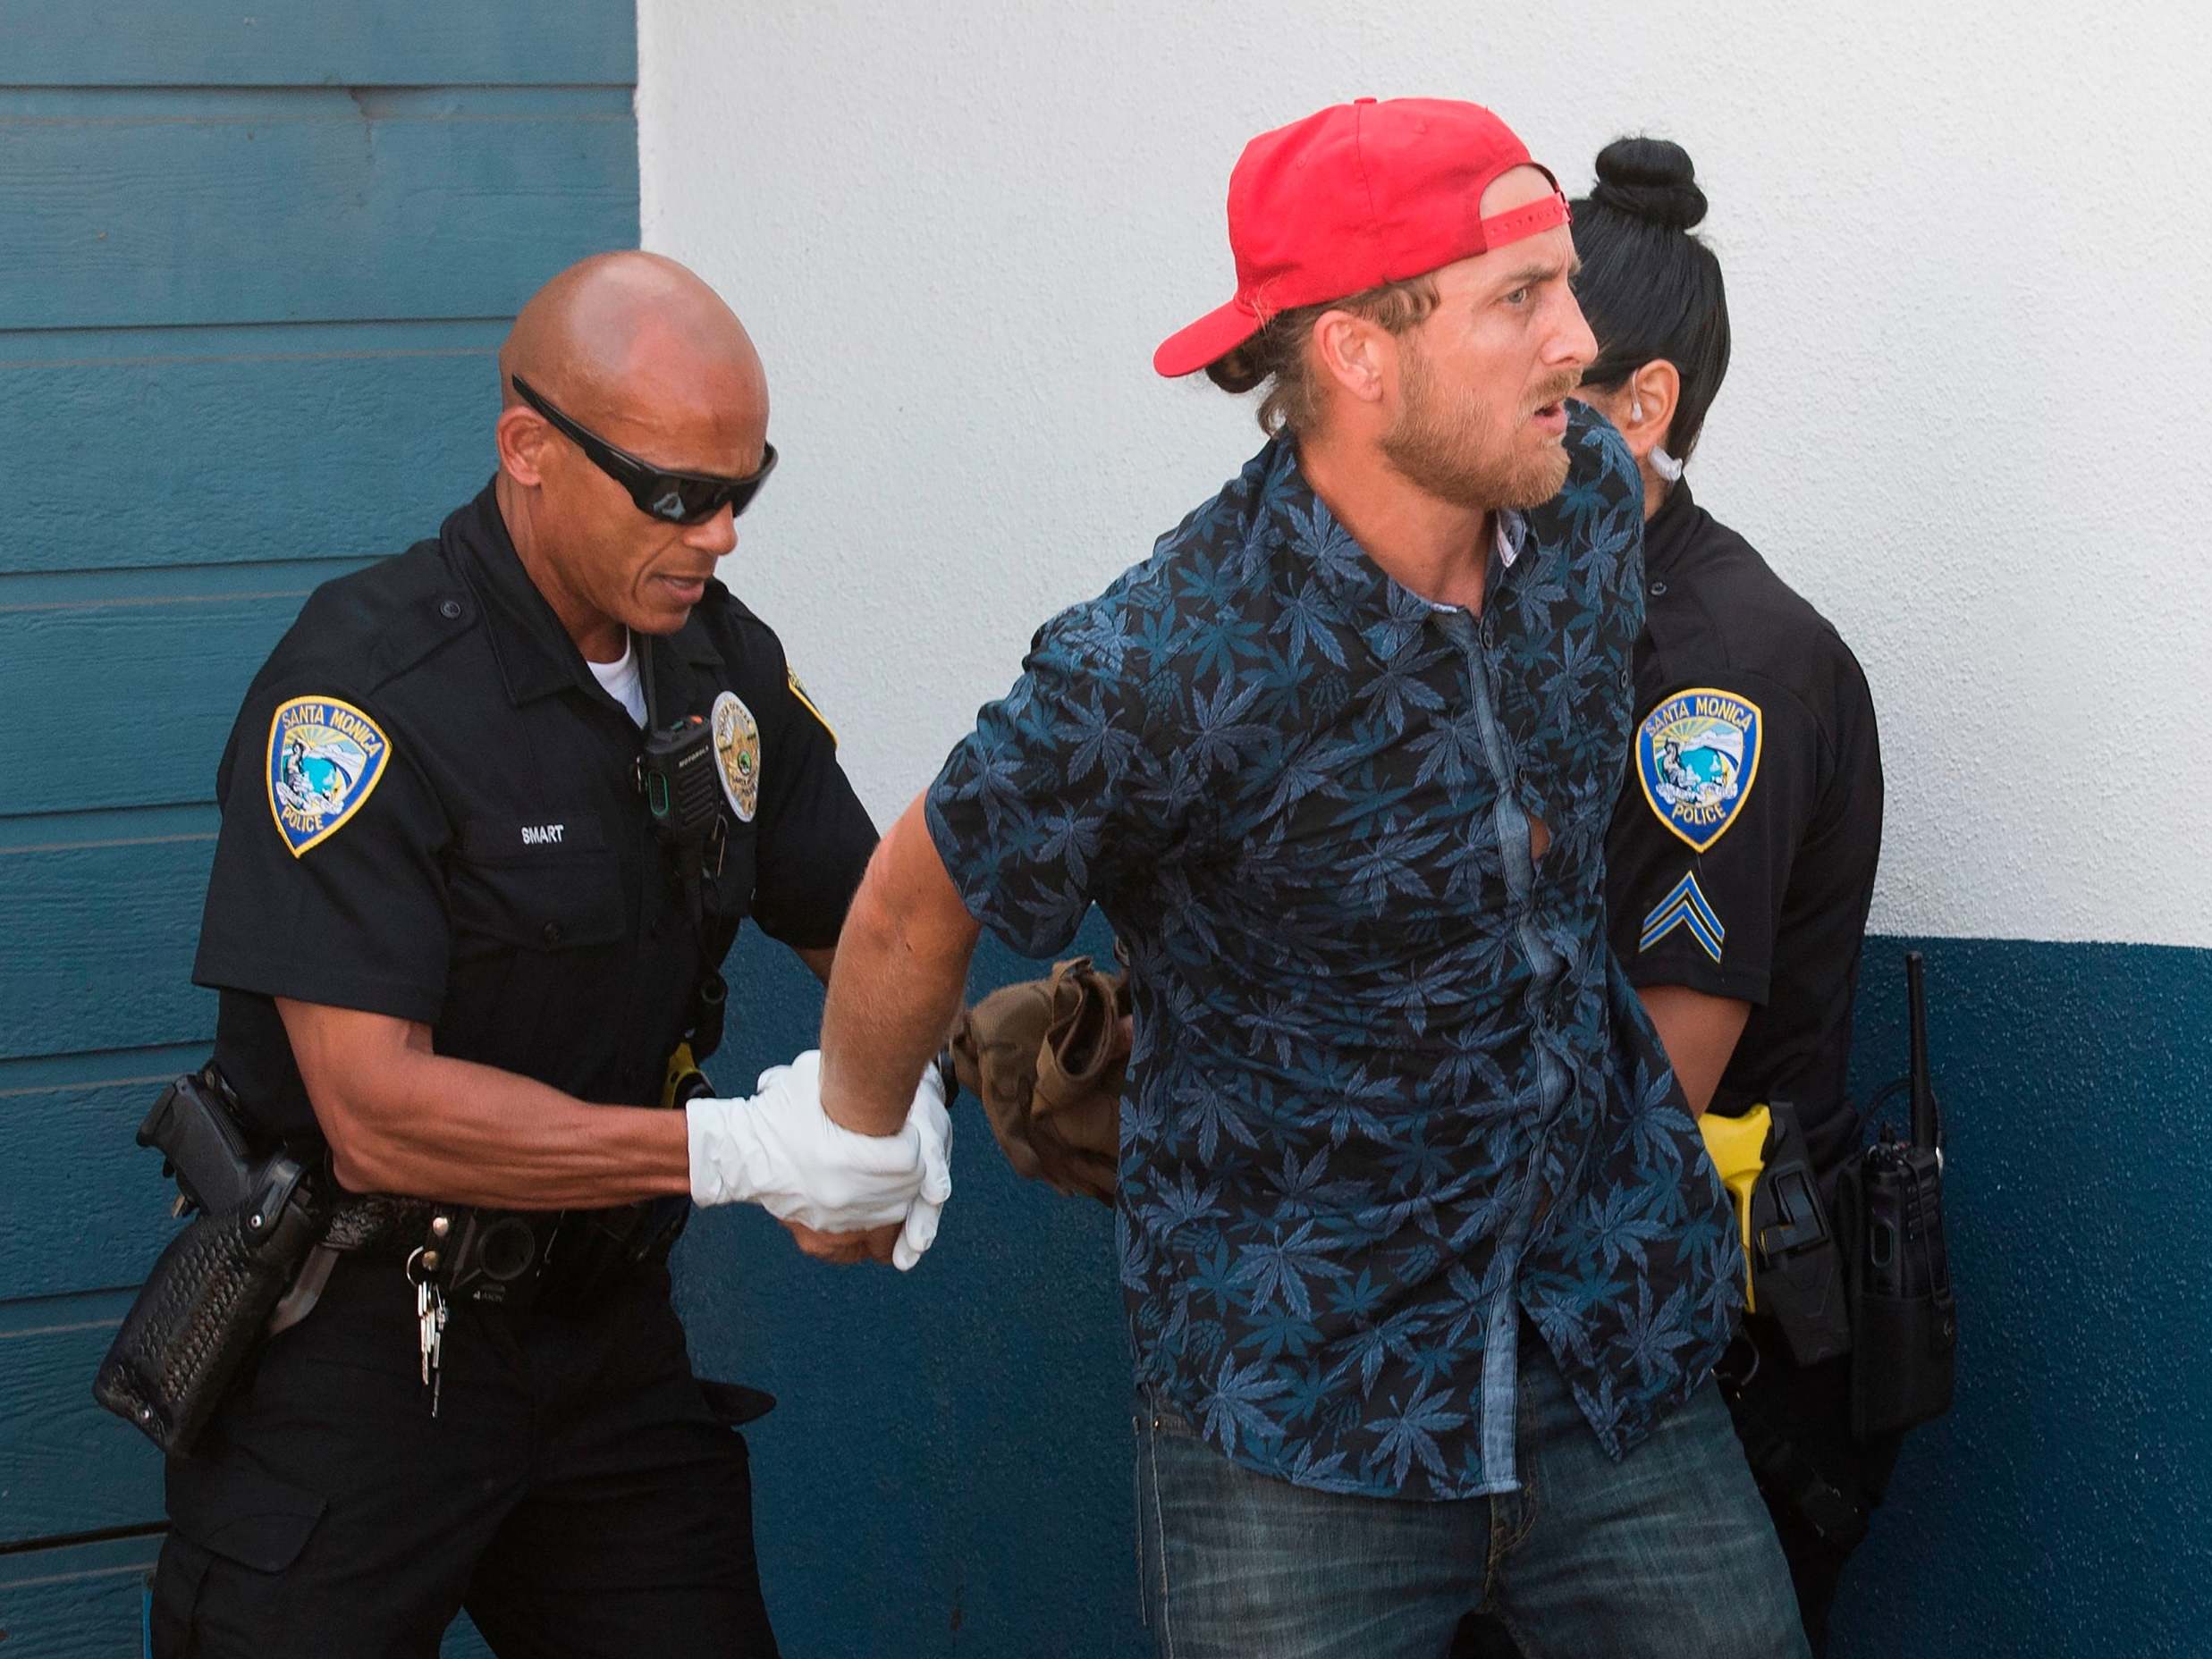 David Nicholas Dempsey seen being arrested in Santa Monica after incident